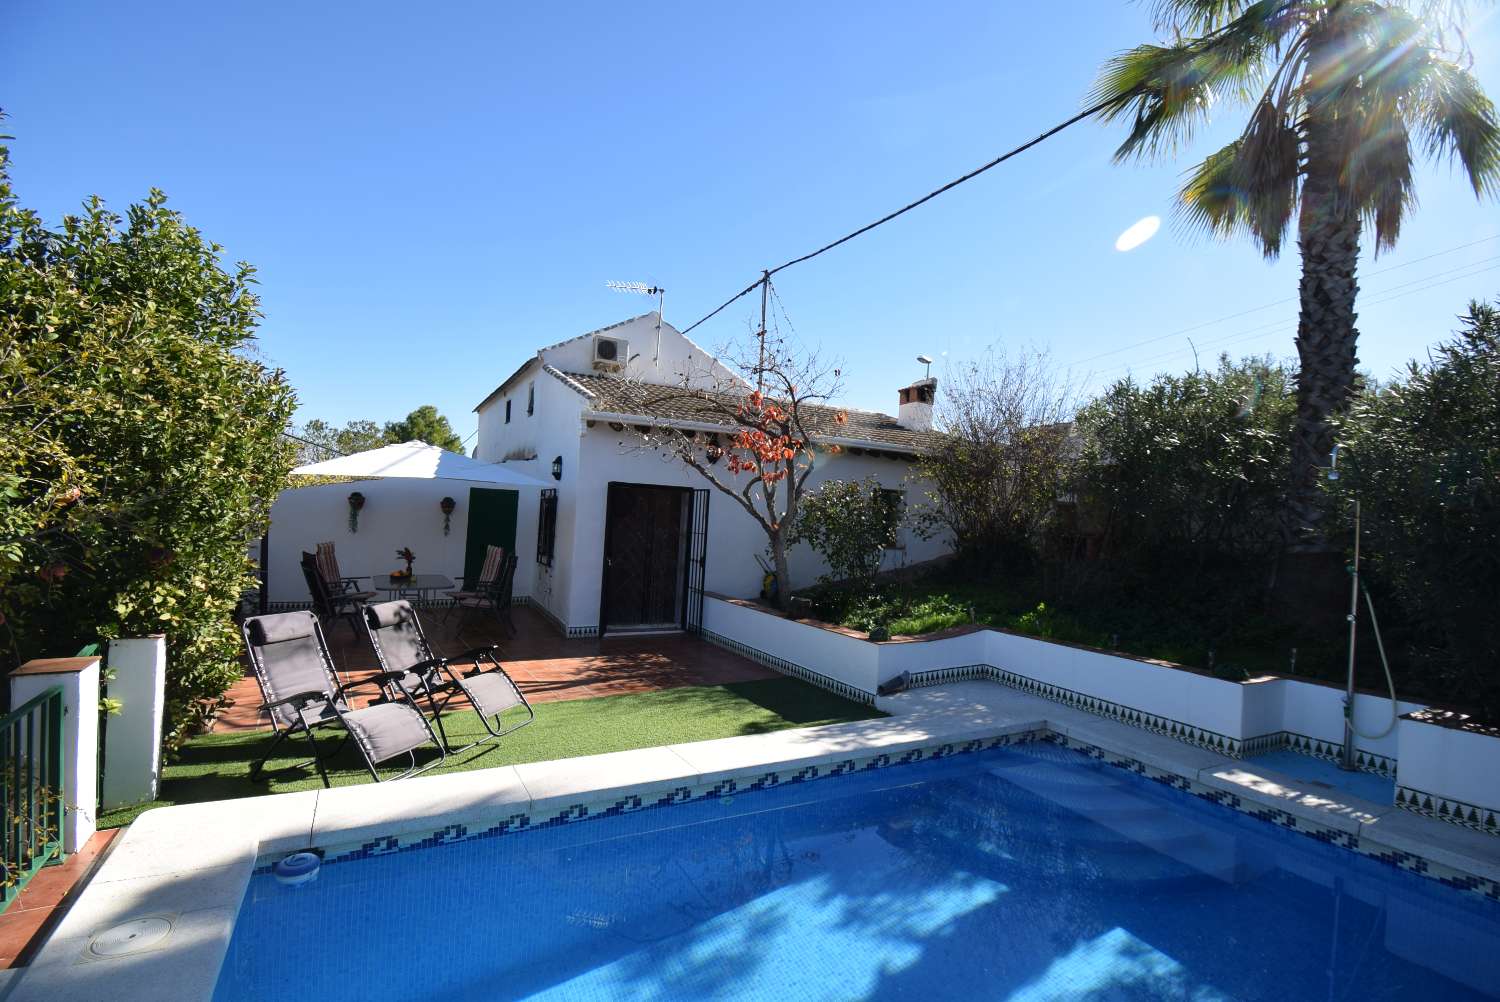 Lovely cottage with pool, garden and nice views